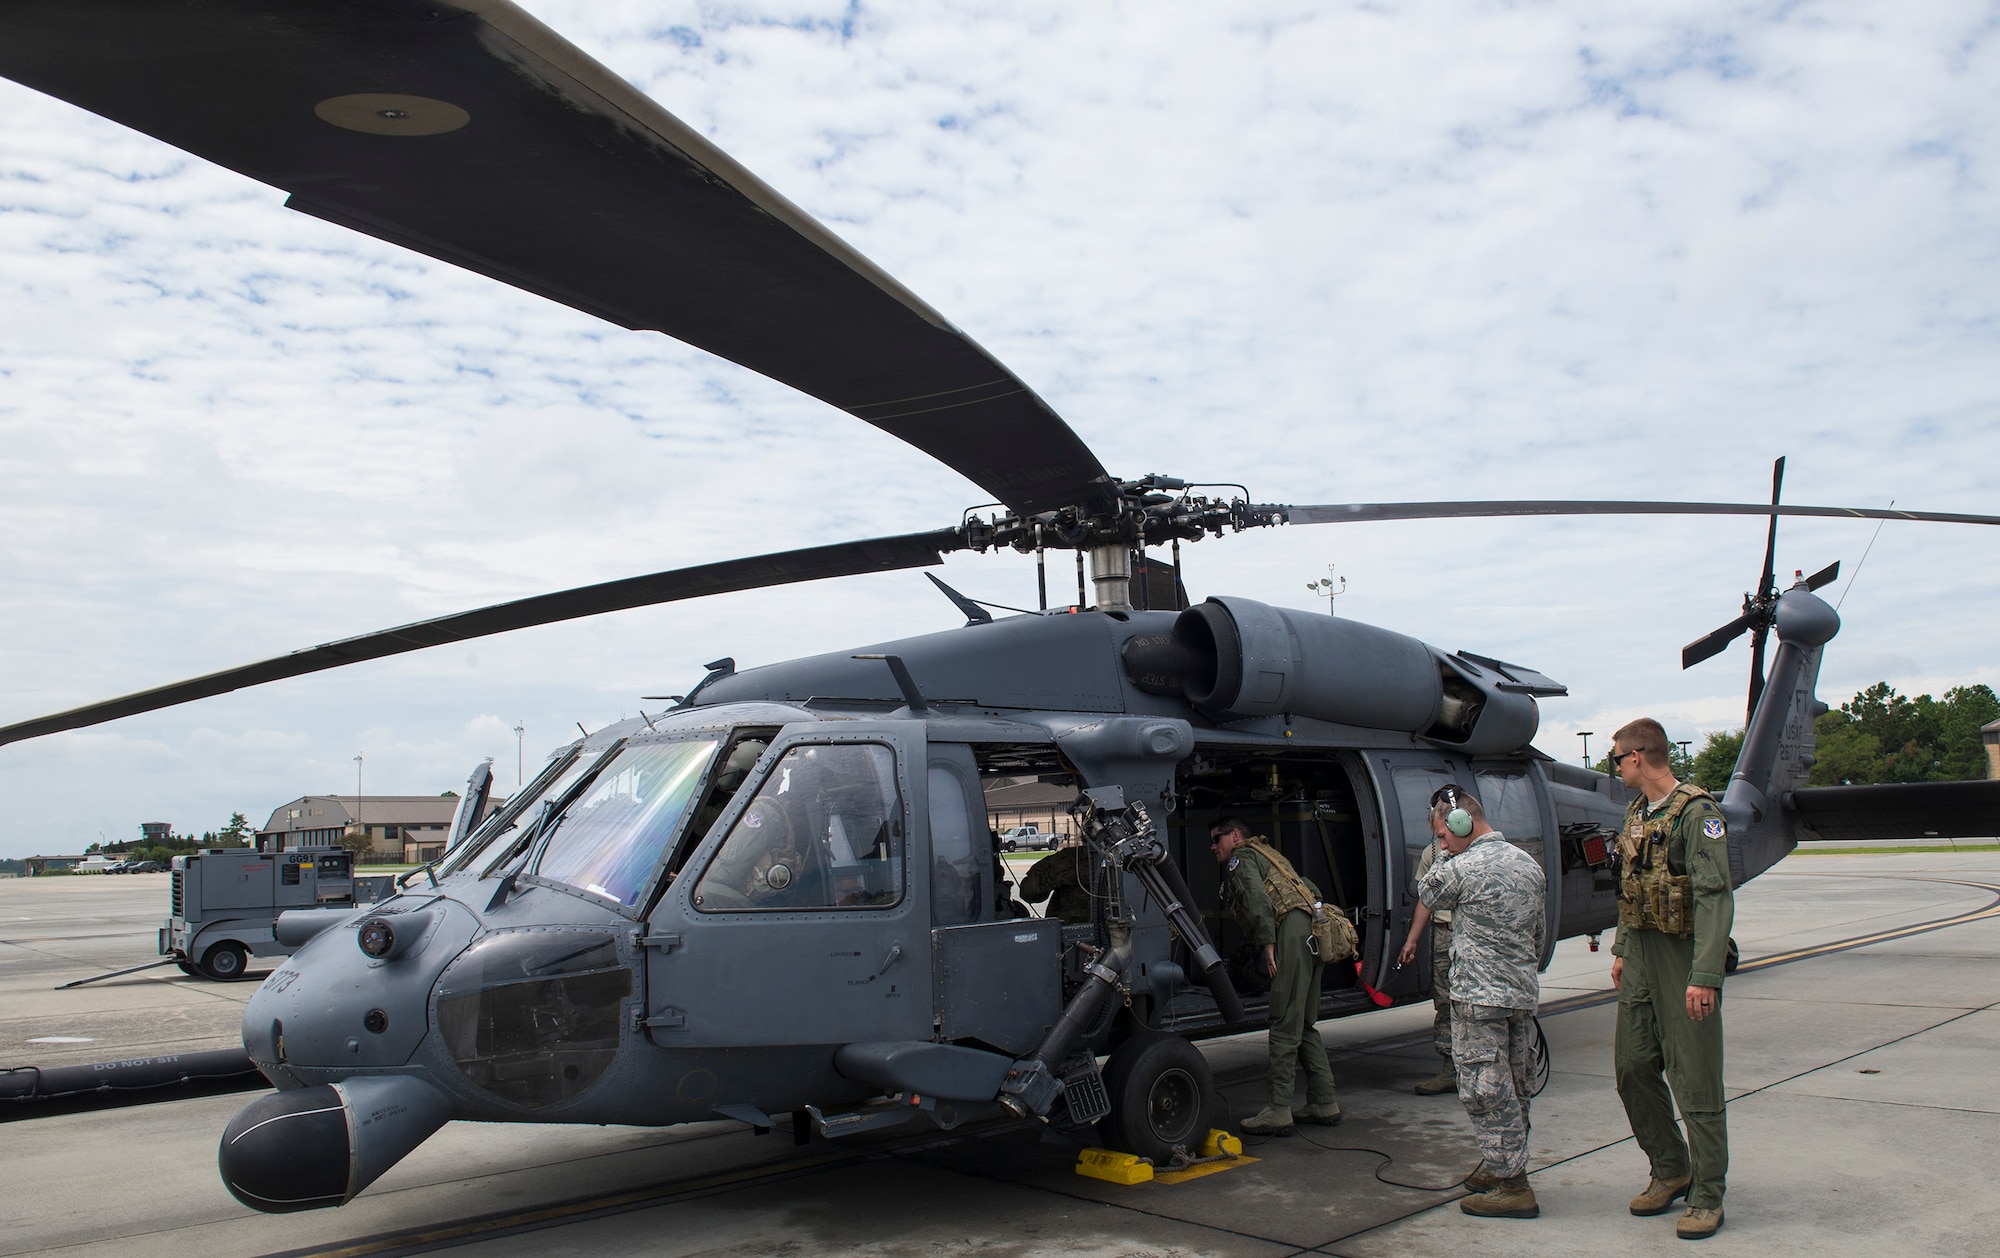 U.S. Air Force crew chiefs from the 41st Helicopter Maintenance Unit assist aircrew members from the 41st Rescue Squadron, during an HH-60G Pave Hawk’s pre-flight inspection, Aug. 10, 2016, at Moody Air Force Base, Ga. 41st HMU crew chiefs are responsible for ensuring HH-60s are ready to fly at a moment’s notice. (U.S. Air Force photo by Airman 1st Class Greg Nash)